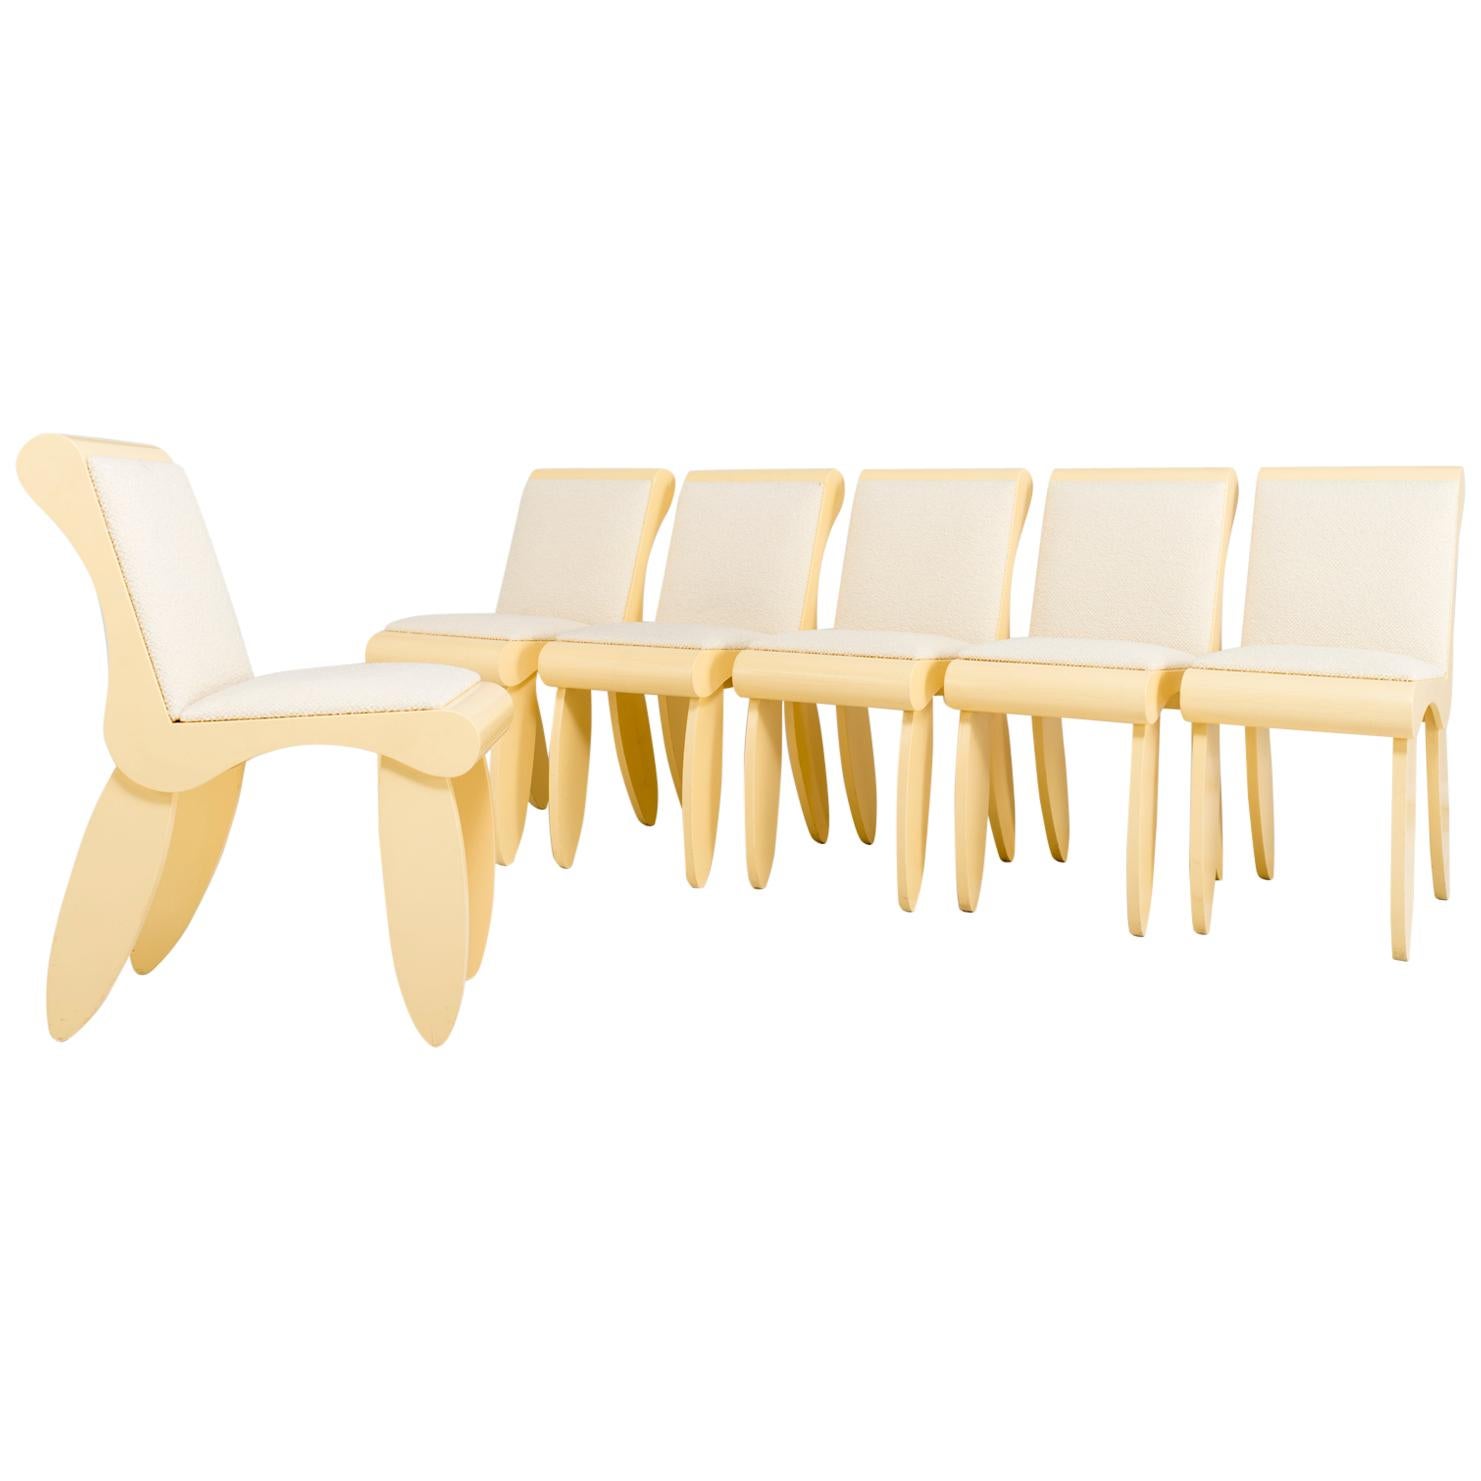 Martin Szekely Set of 6 "Betty" Chairs, Ed. Galerie Neotu - France, Late 1980s